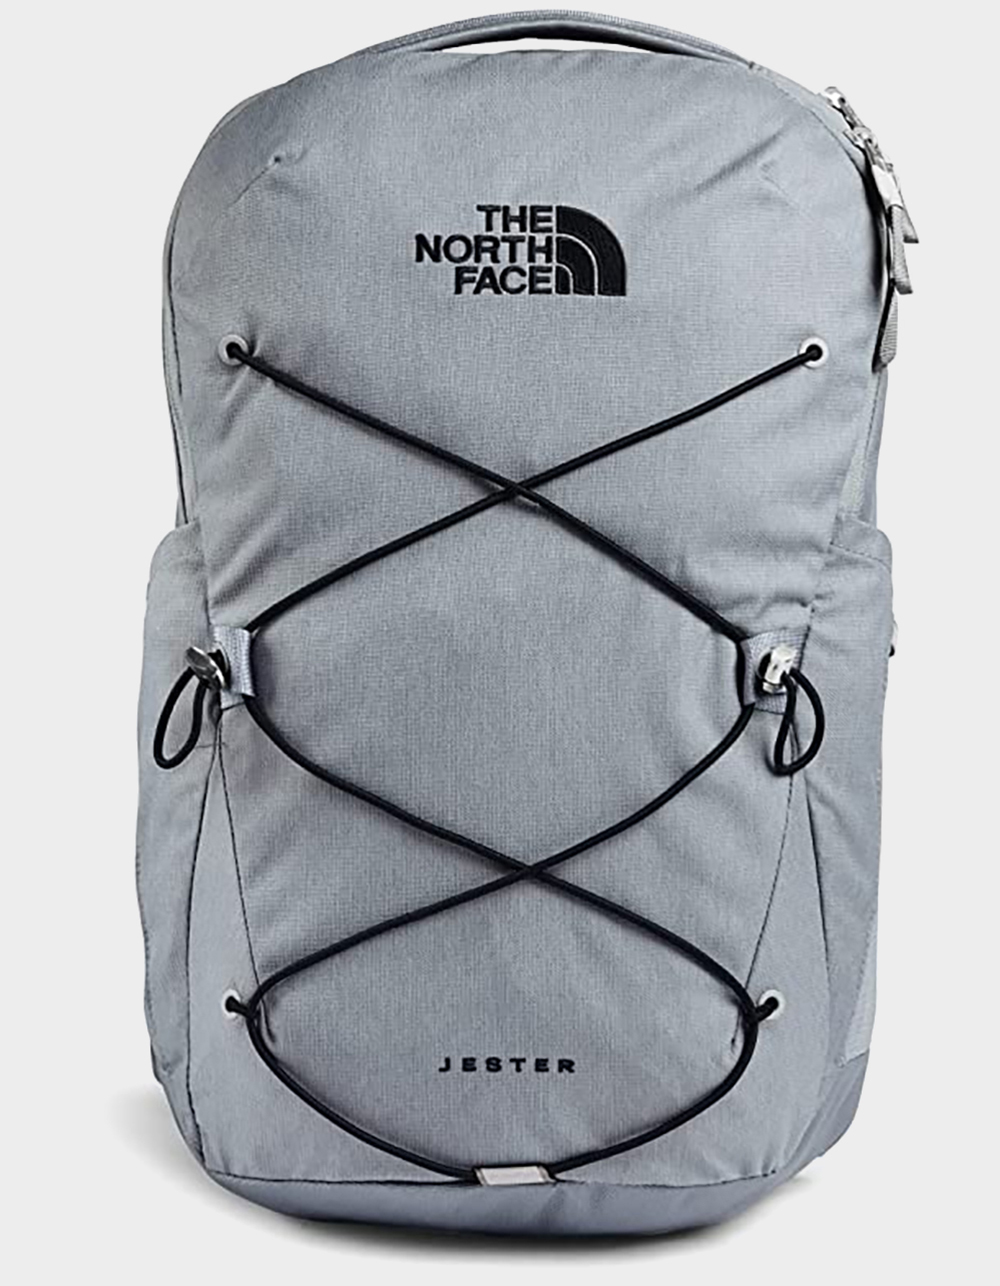 THE FACE Jester Backpack - GRAY | Tillys